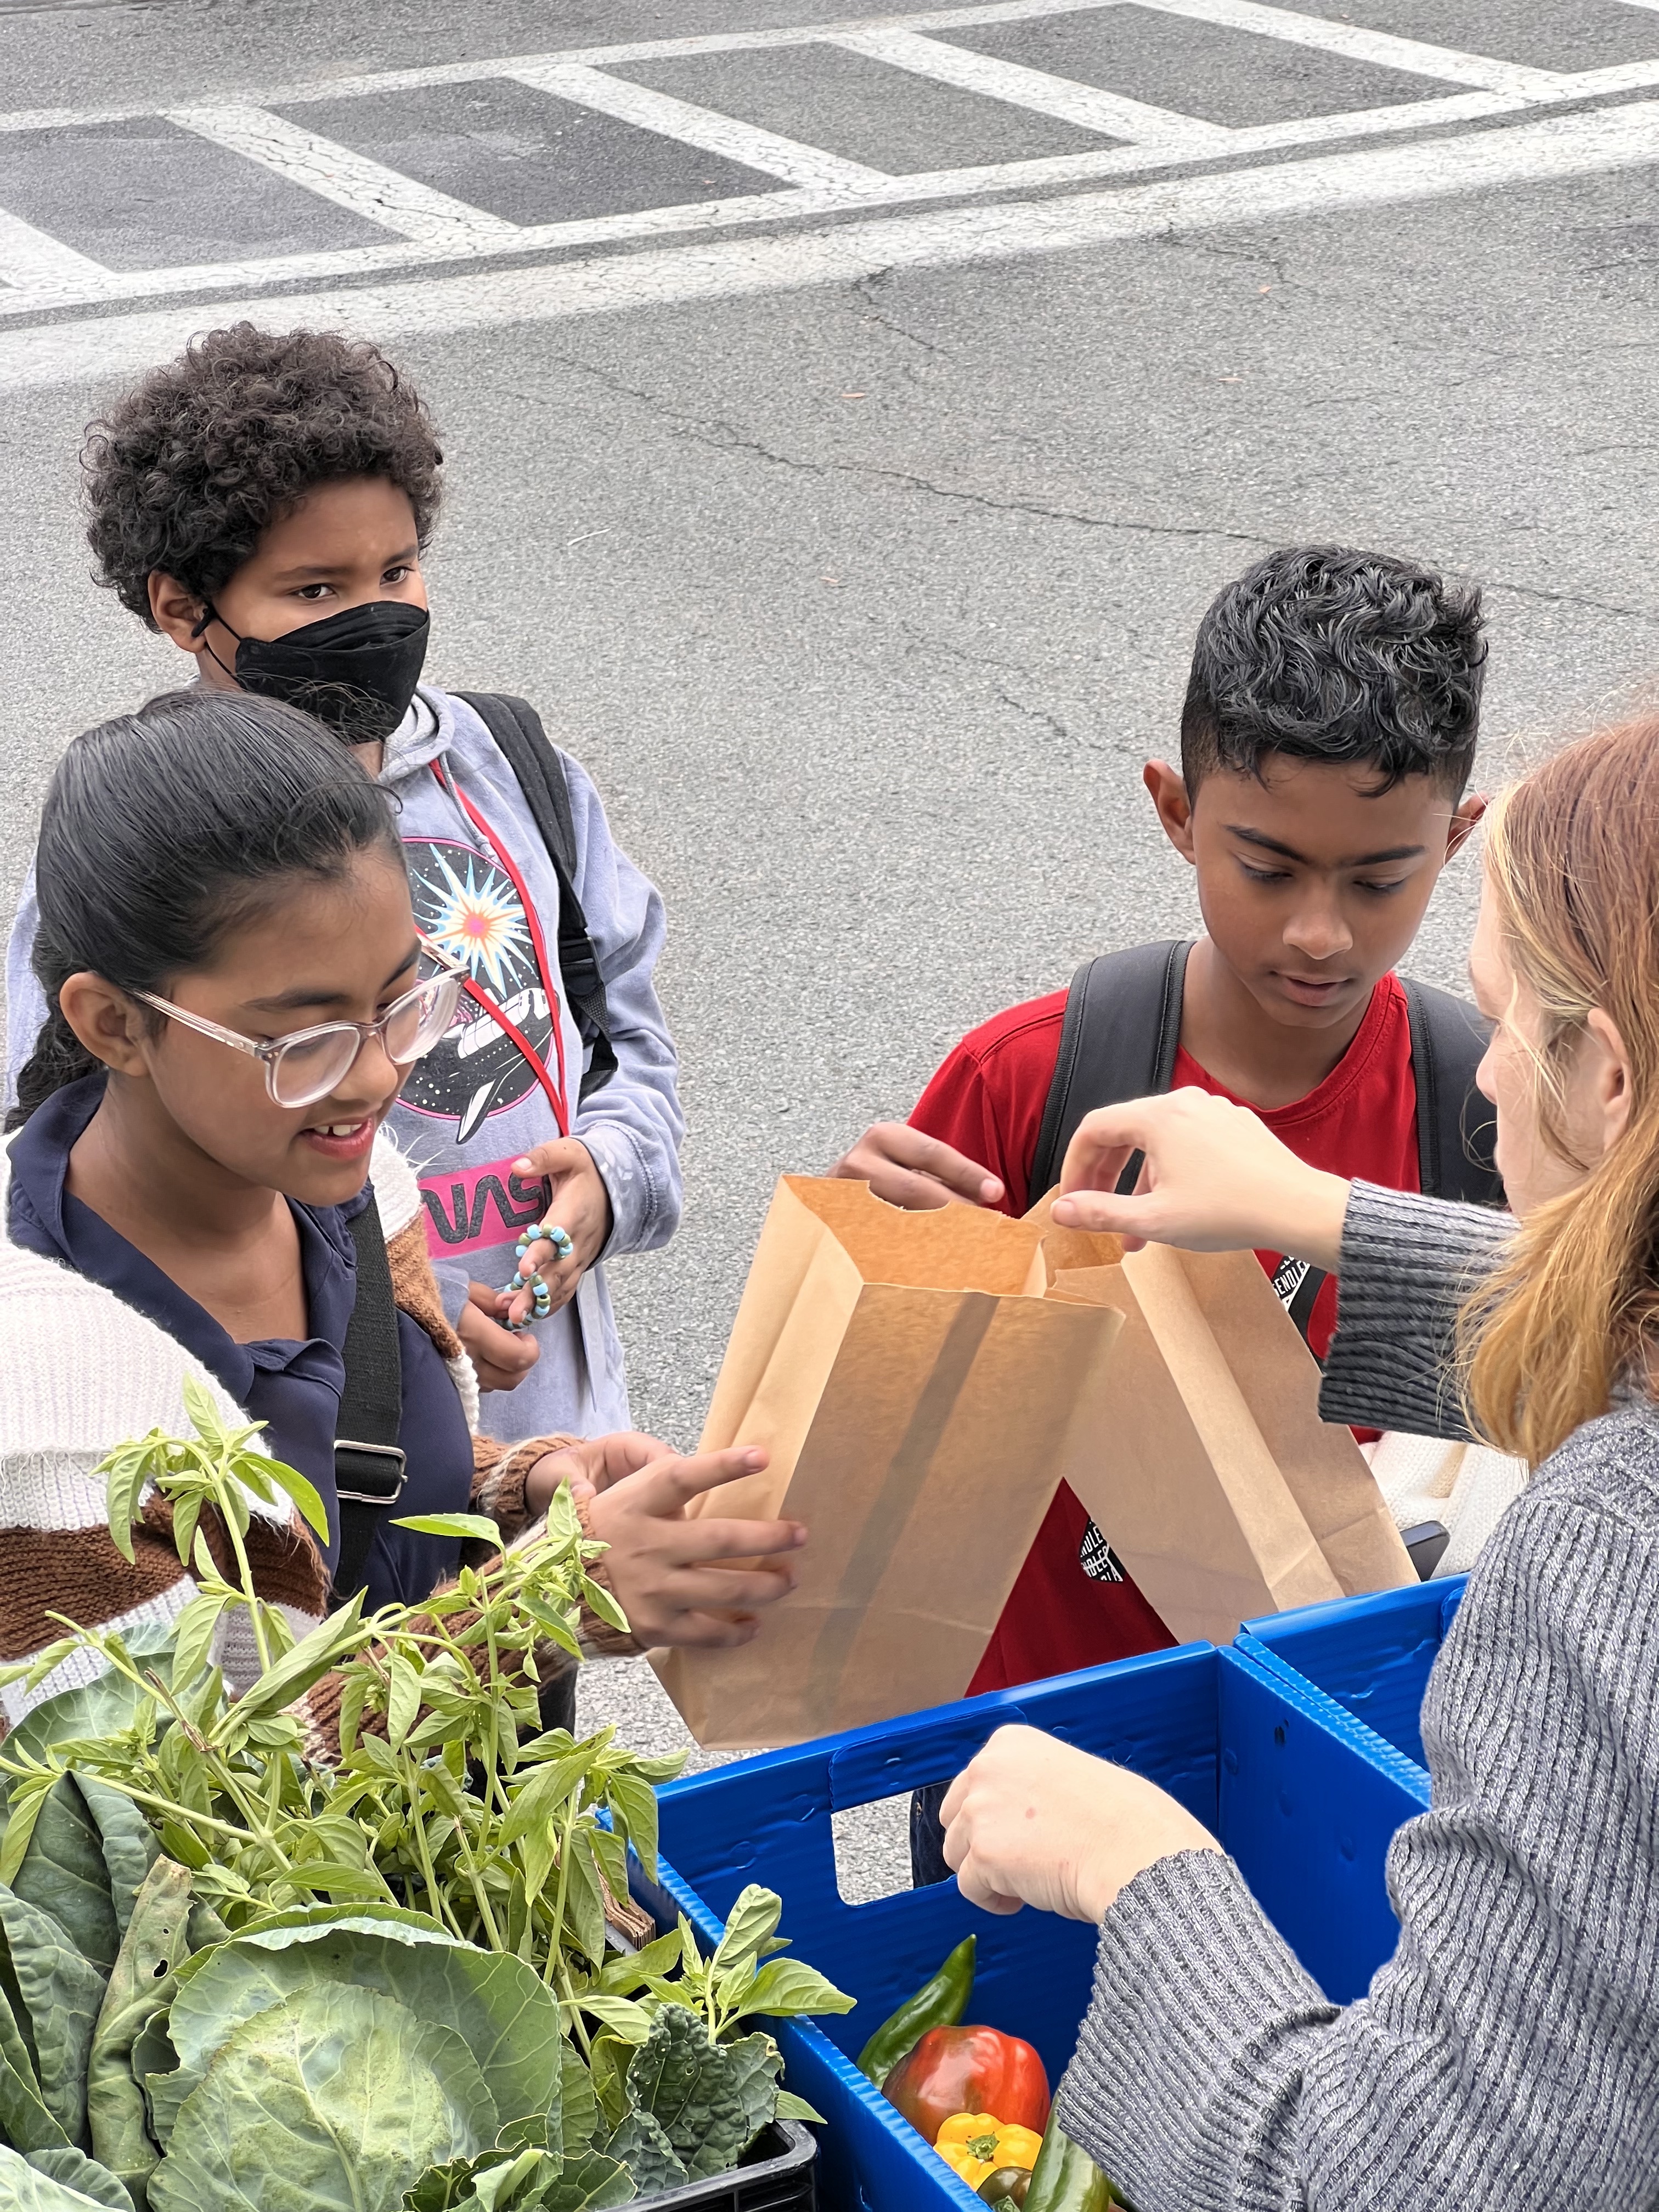 Students fill bags at farmers market